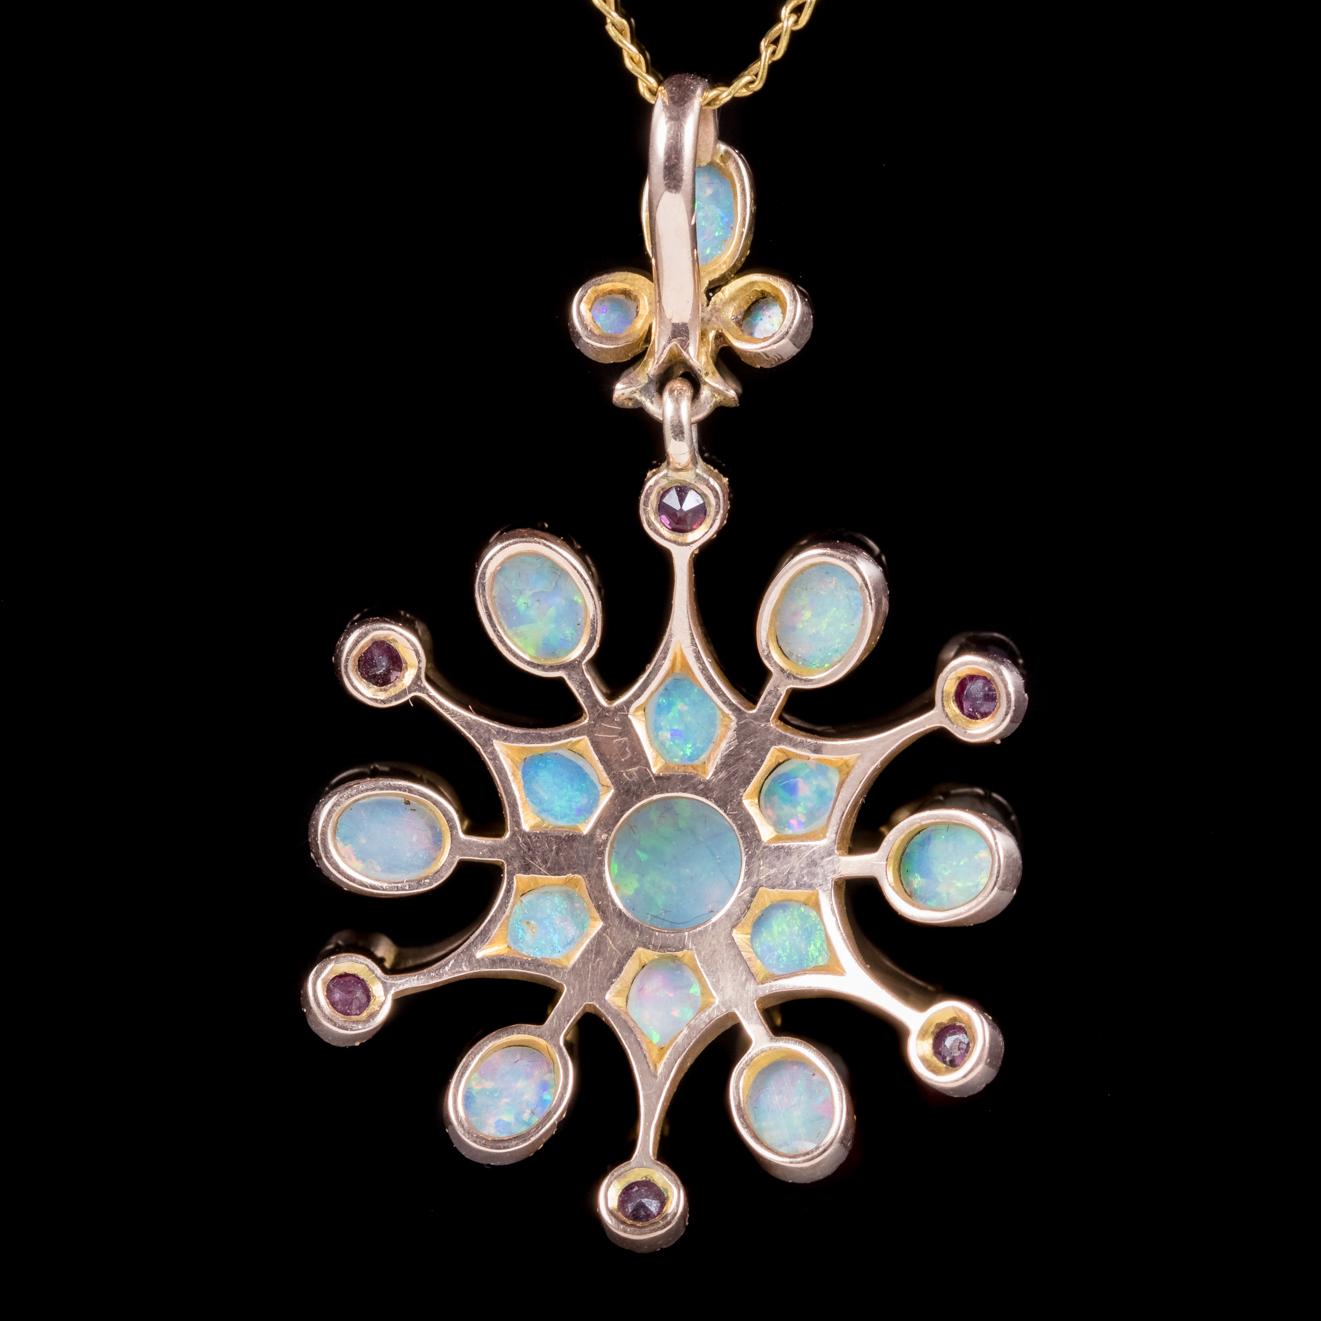 A genuine antique Victorian necklace C. 1880, featuring a fabulous pendant decorated with a starburst of natural Opals and rich red Rubies. 

The central Opal measures 0.80ct alone with smaller colourful Opals spread throughout the gallery and bale.